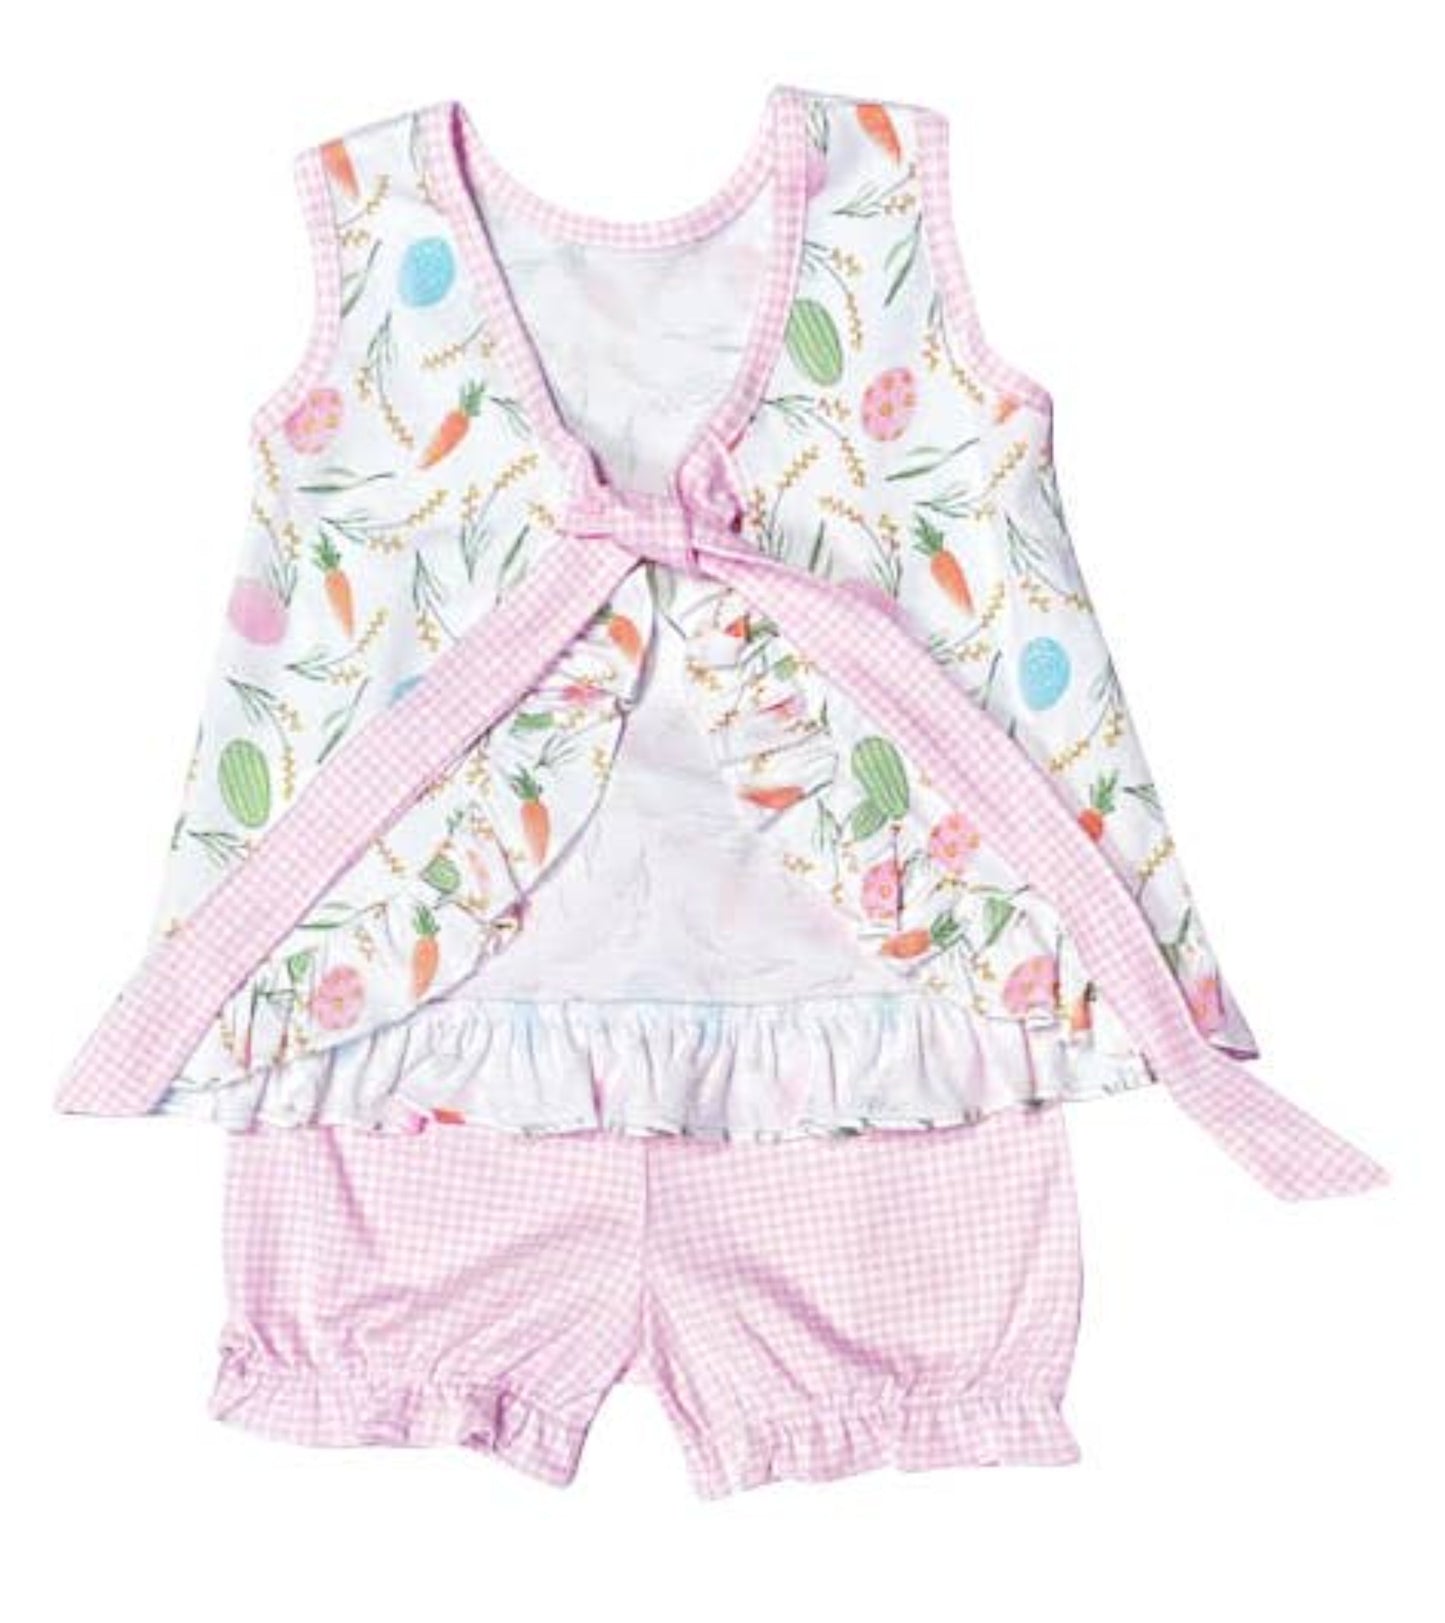 Front side: Beautiful, delicate two-piece girls set popover with Easter eggs printed on 100% Pima cotton, white background. The bottom is pink, checkered Pima. Ties and ruffles are pink Pima cotton.